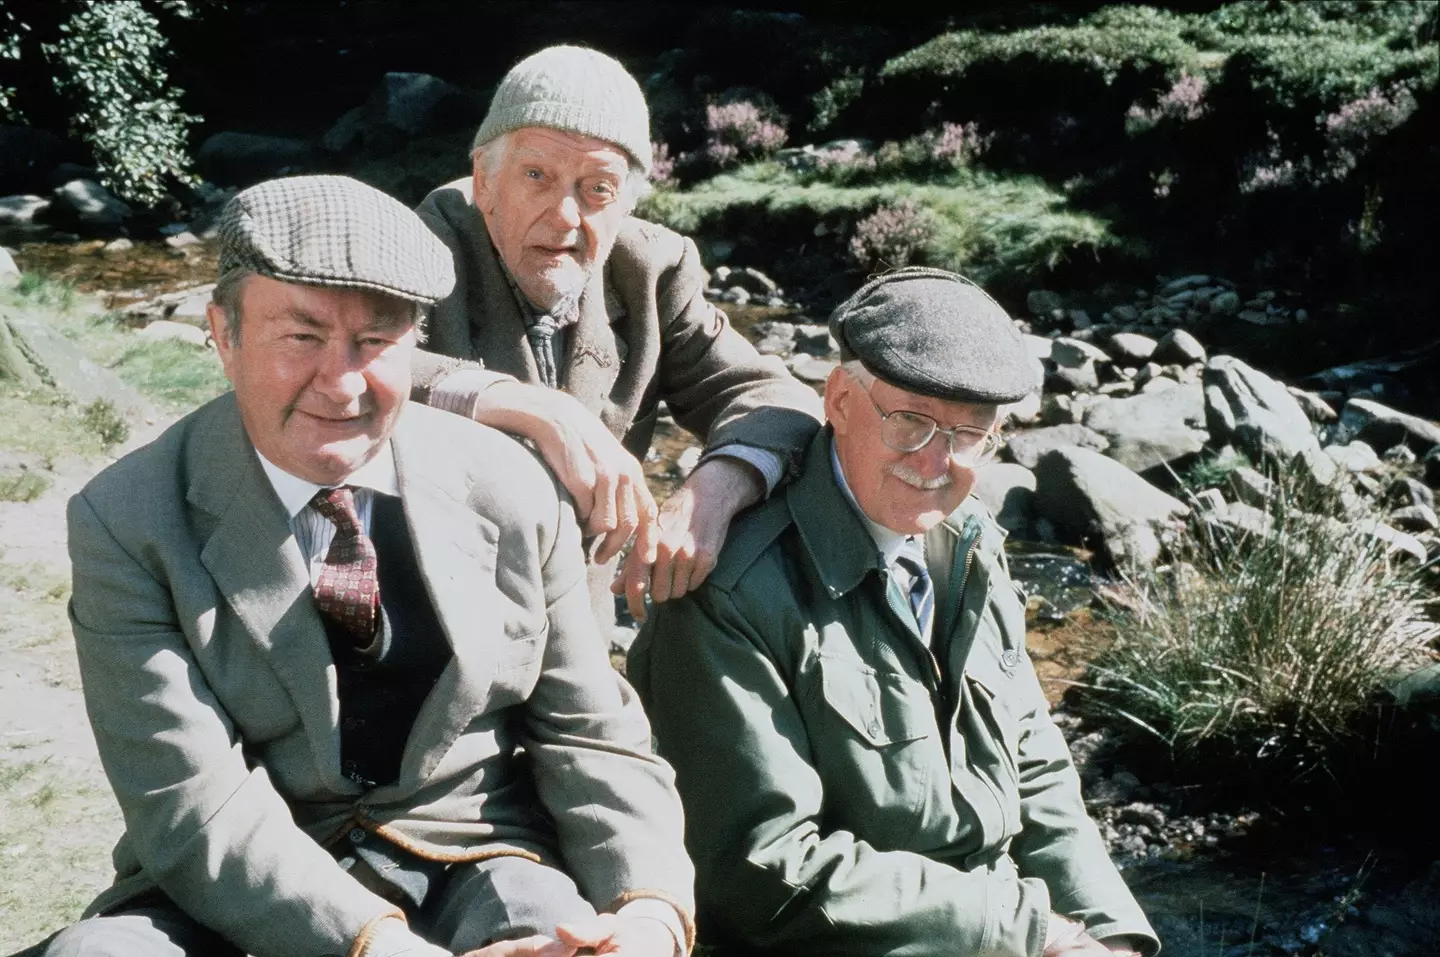 Tom Owen joined Last of the Summer Wine as the long lost son of his father Bill Owen's (middle) character Compo.